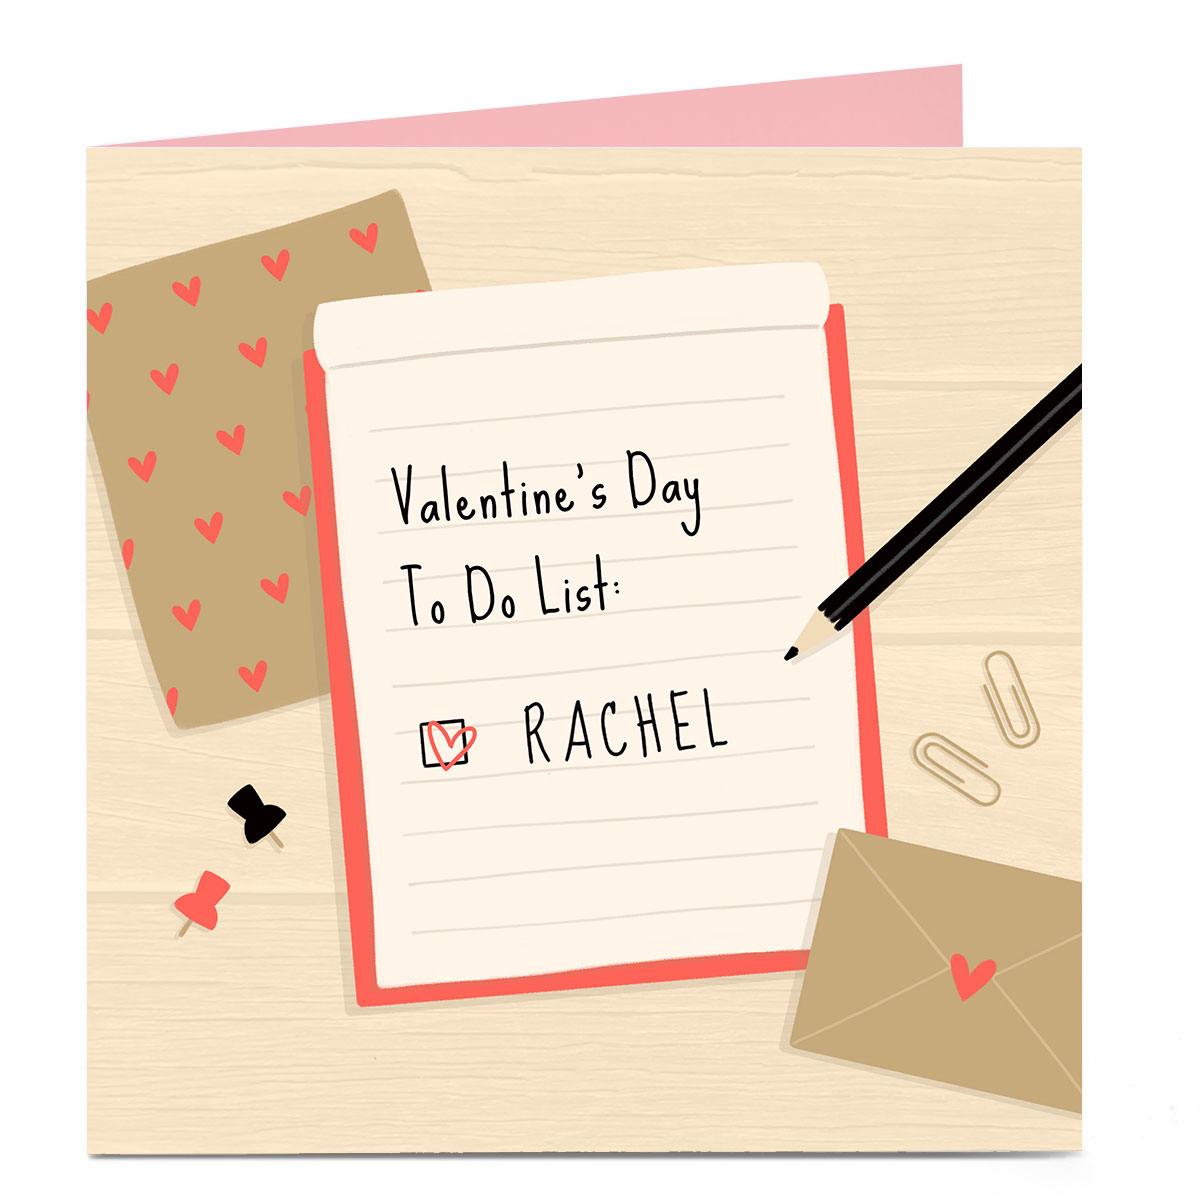 Personalised Valentine's Day Card - To Do List